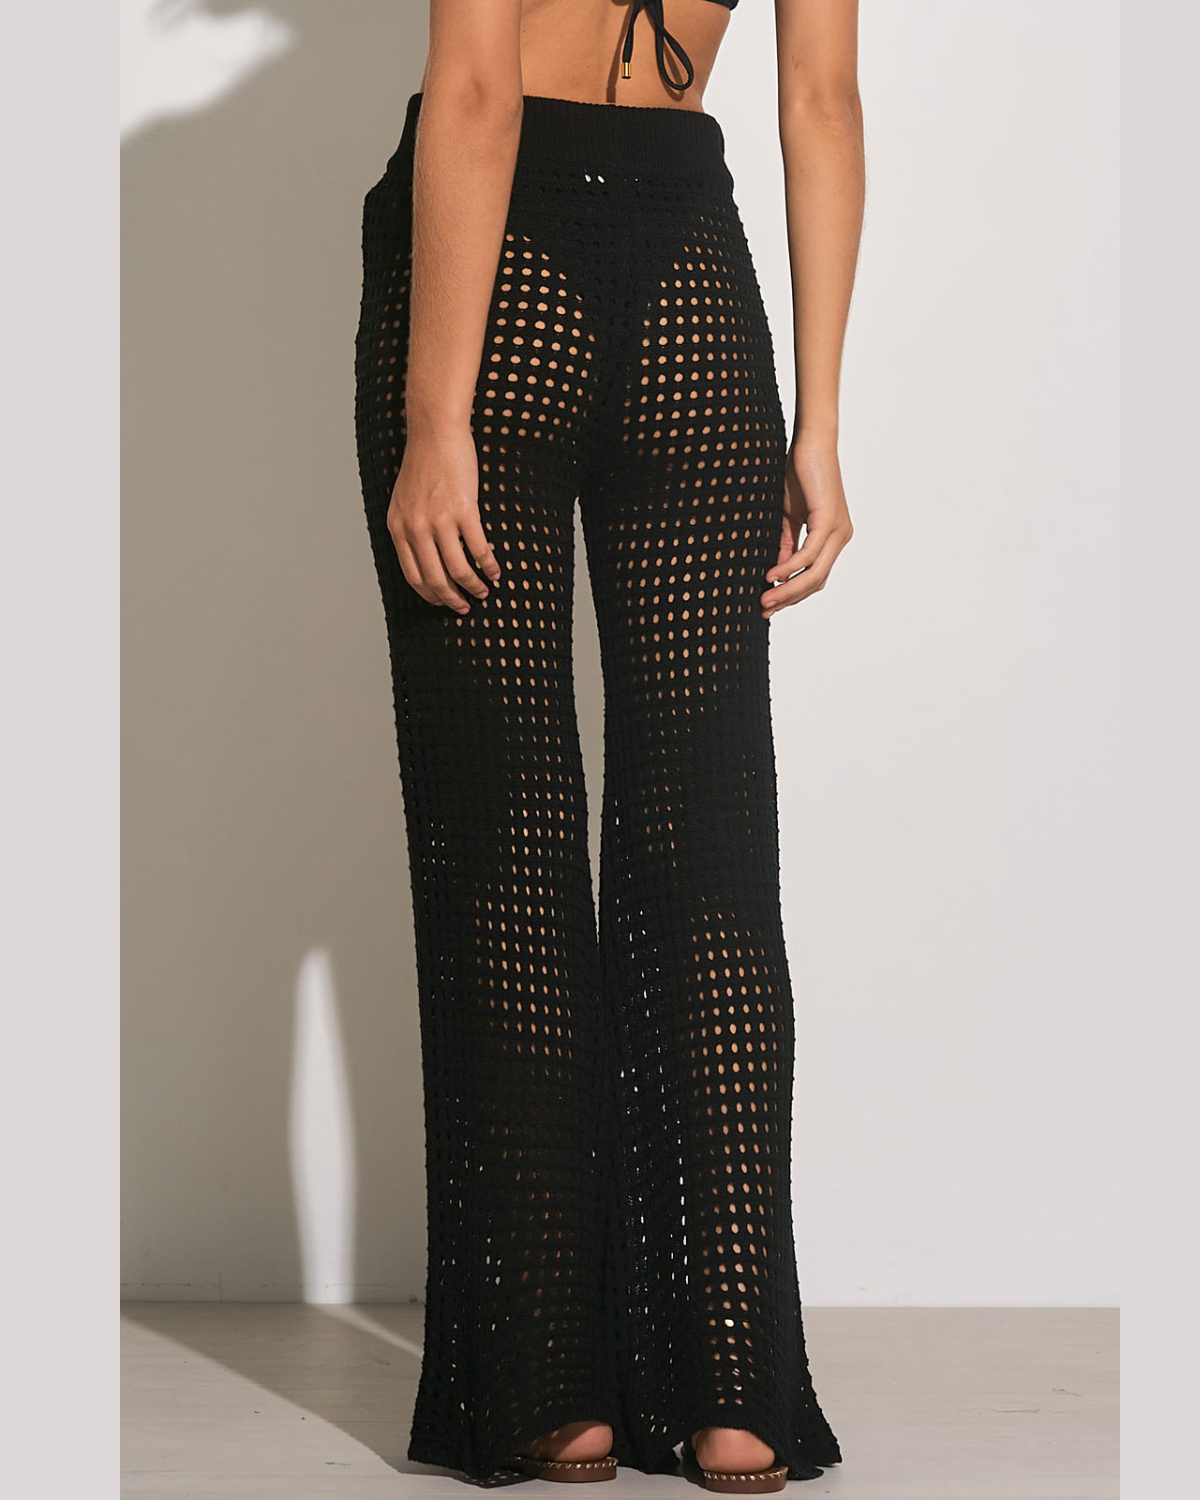 Model wearing a crochet pant cover up in black